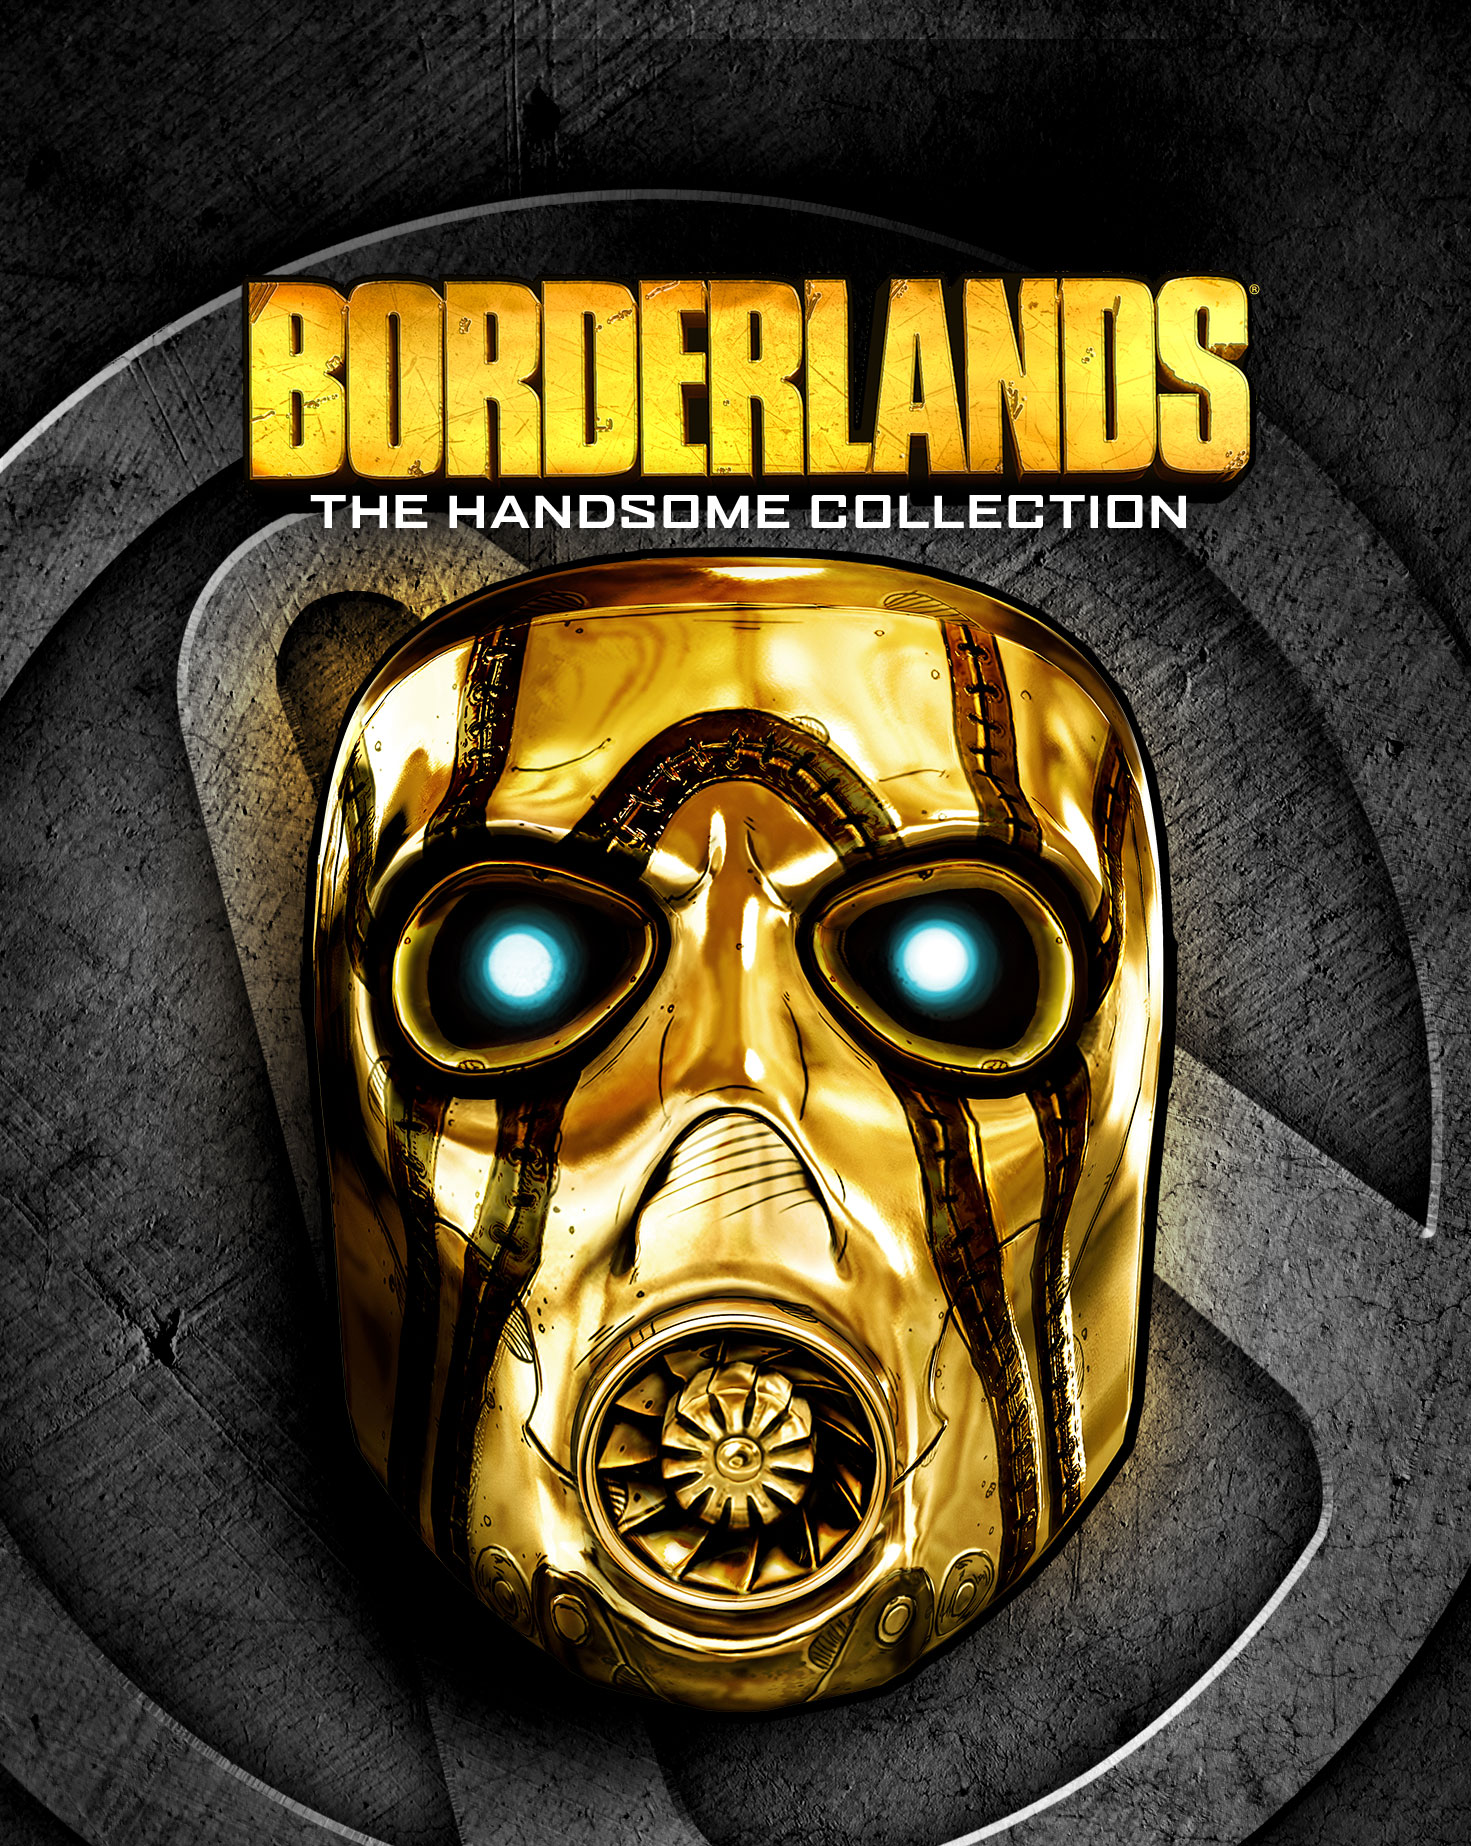 “Borderlands: The Handsome Collection” Announced - Includes 